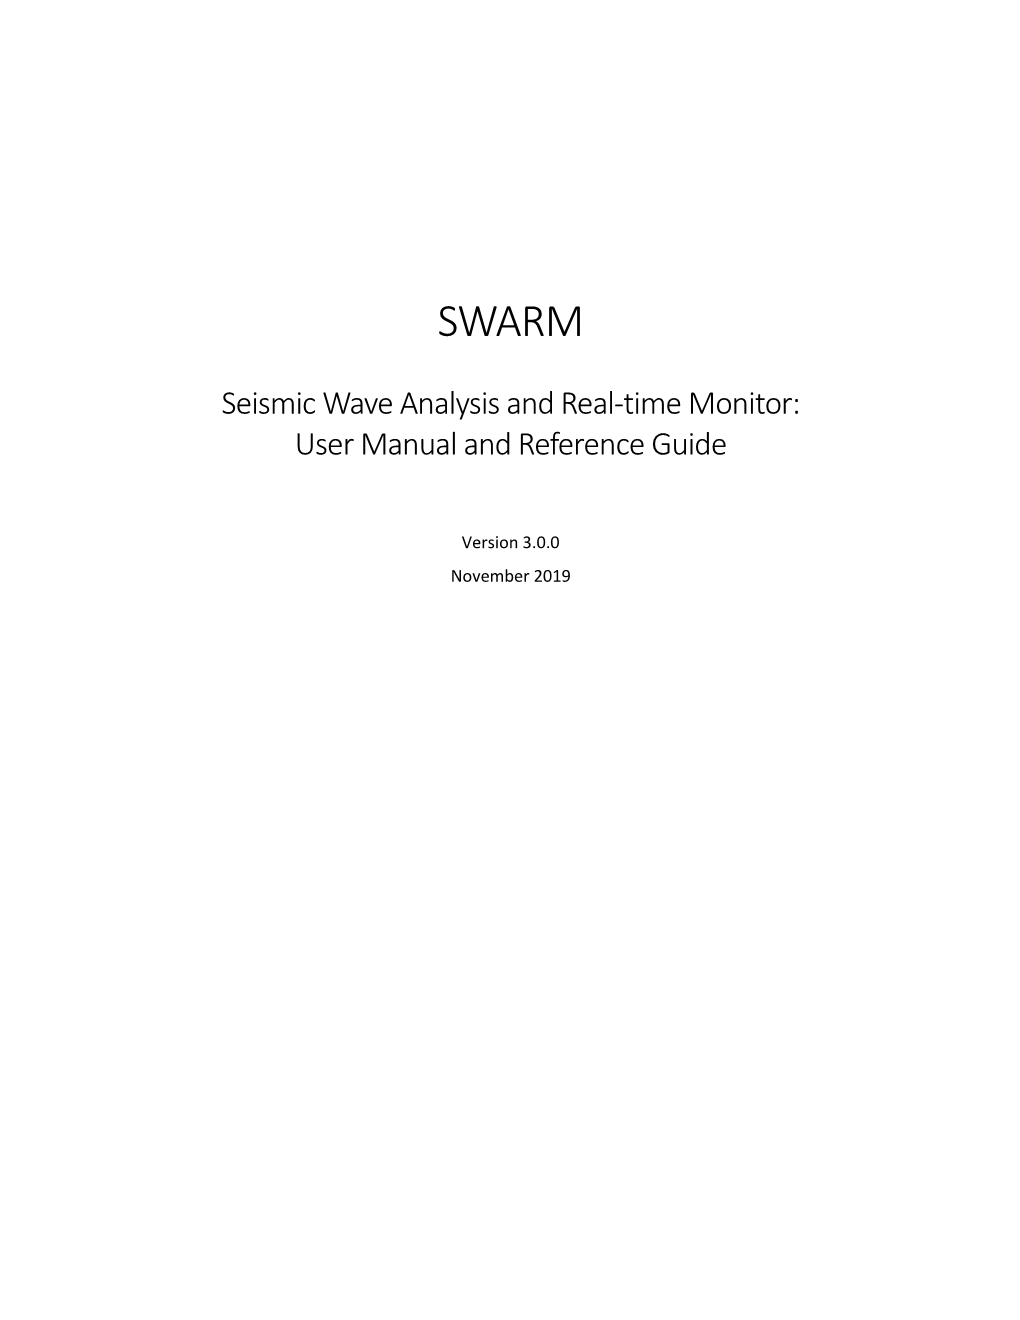 Seismic Wave Analysis and Real-Time Monitor: User Manual and Reference Guide